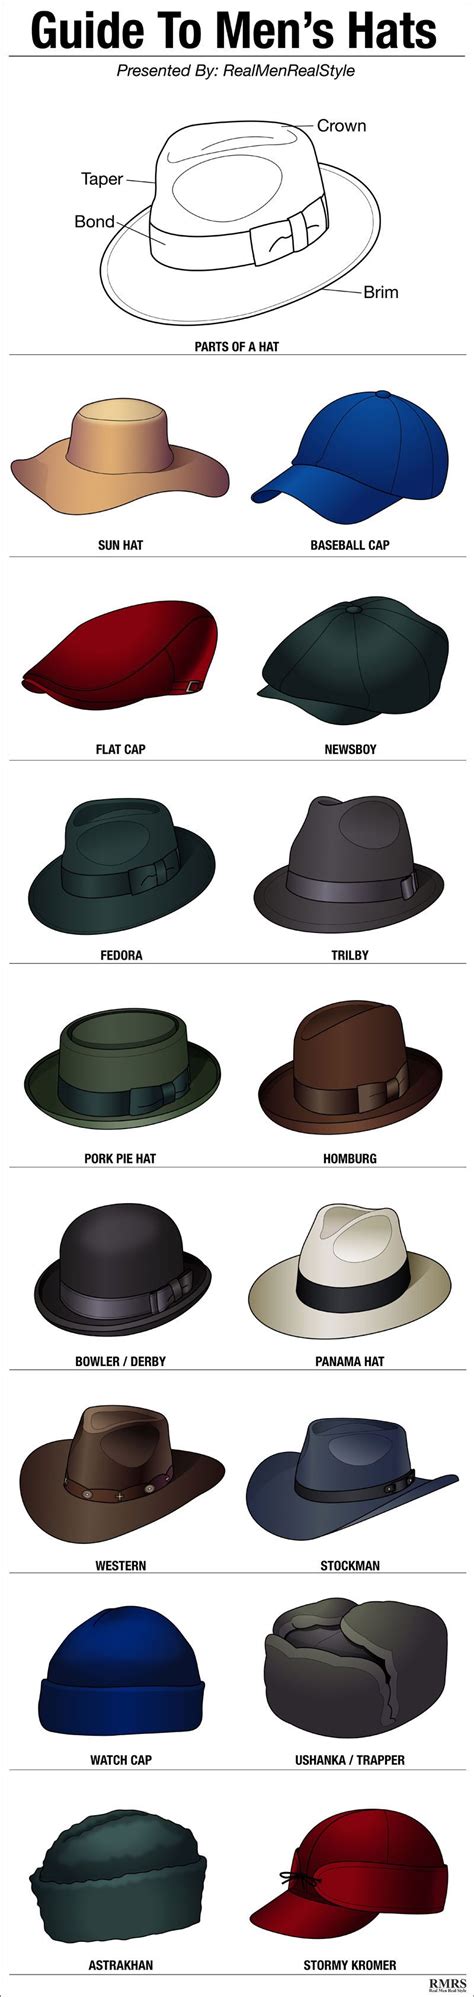 16 Stylish Mens Hats Hat Style Guide Mans Headwear Infographic